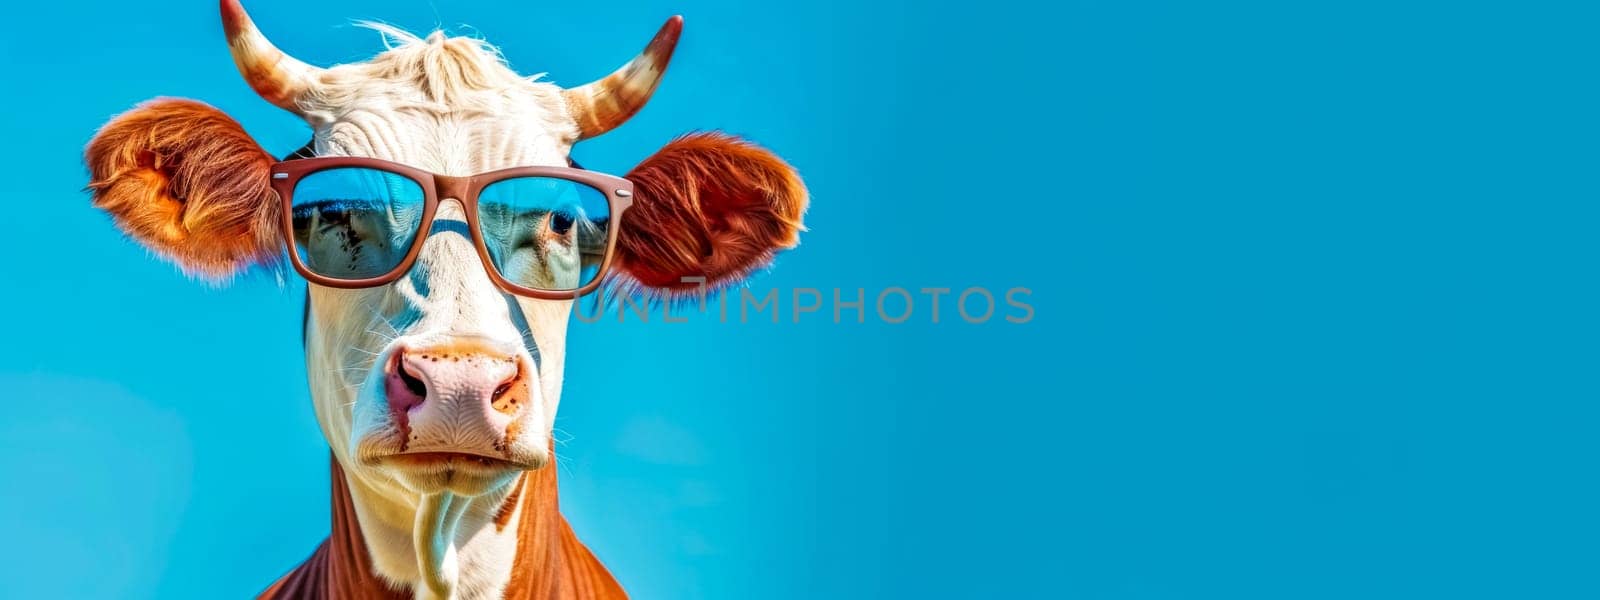 Cool cow with sunglasses on blue background by Edophoto